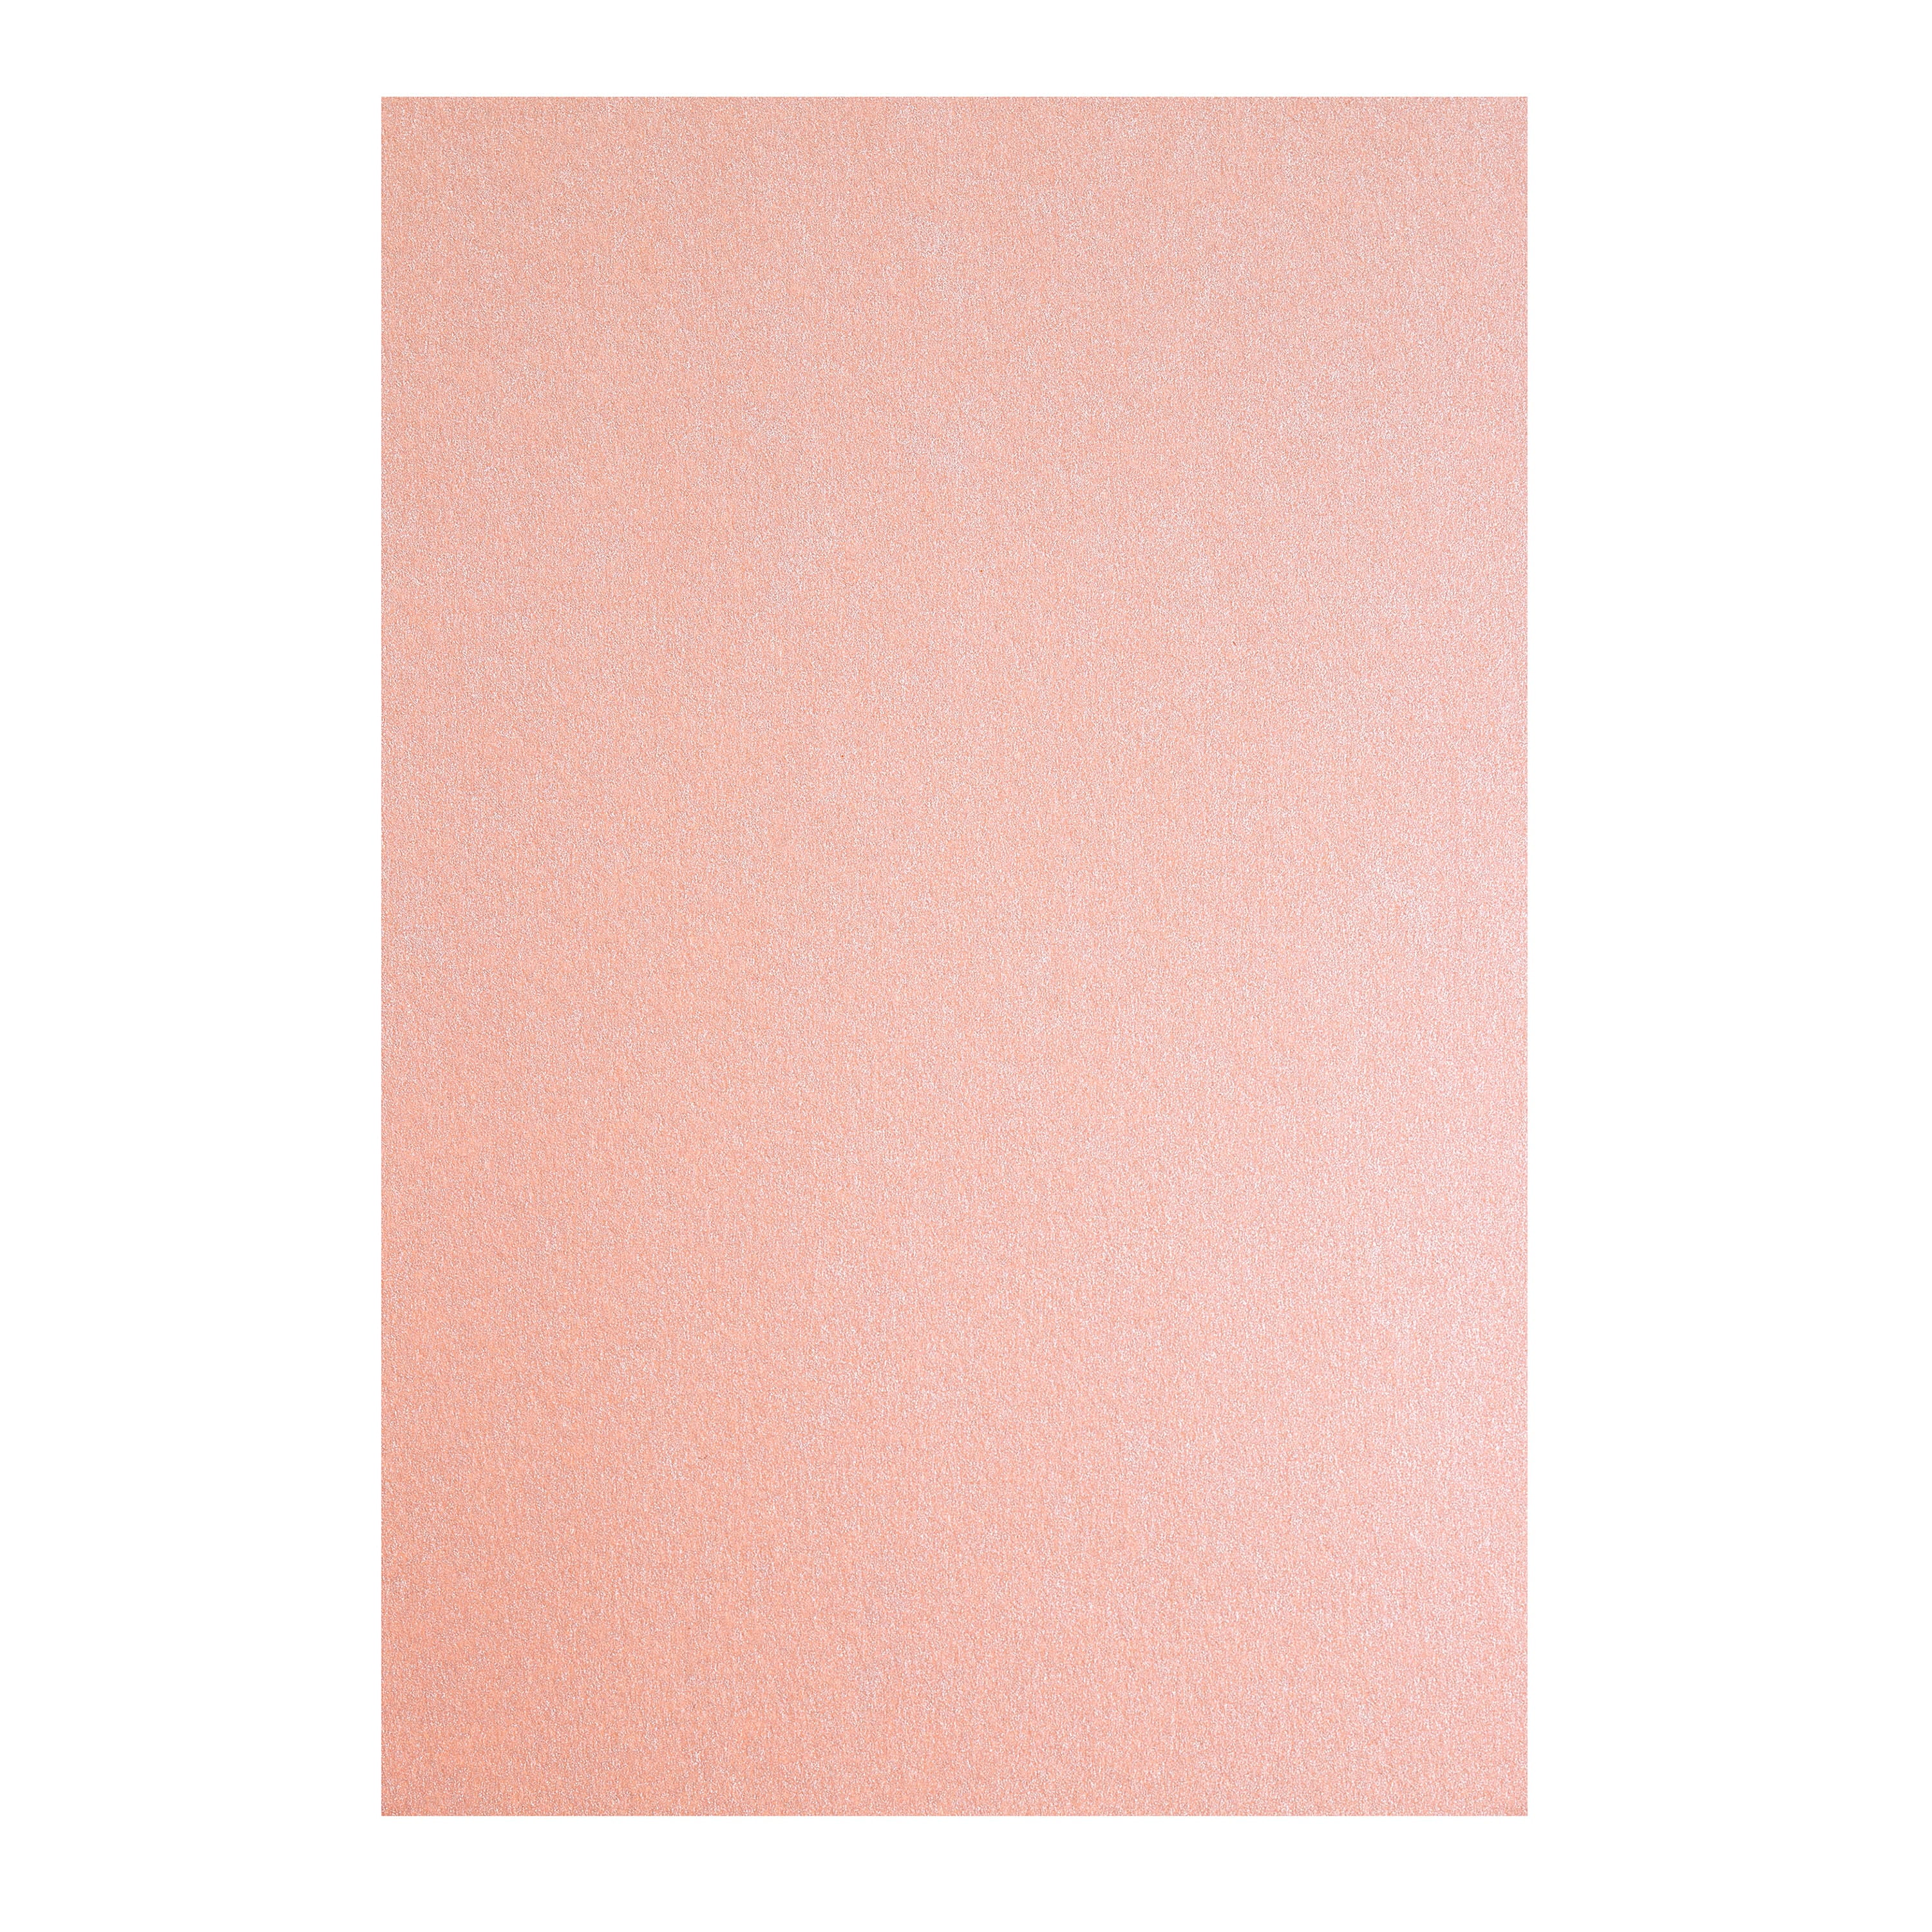 9 Packs: 100 ct. (900 total) Pink Hues Shimmer 8.5 x 11